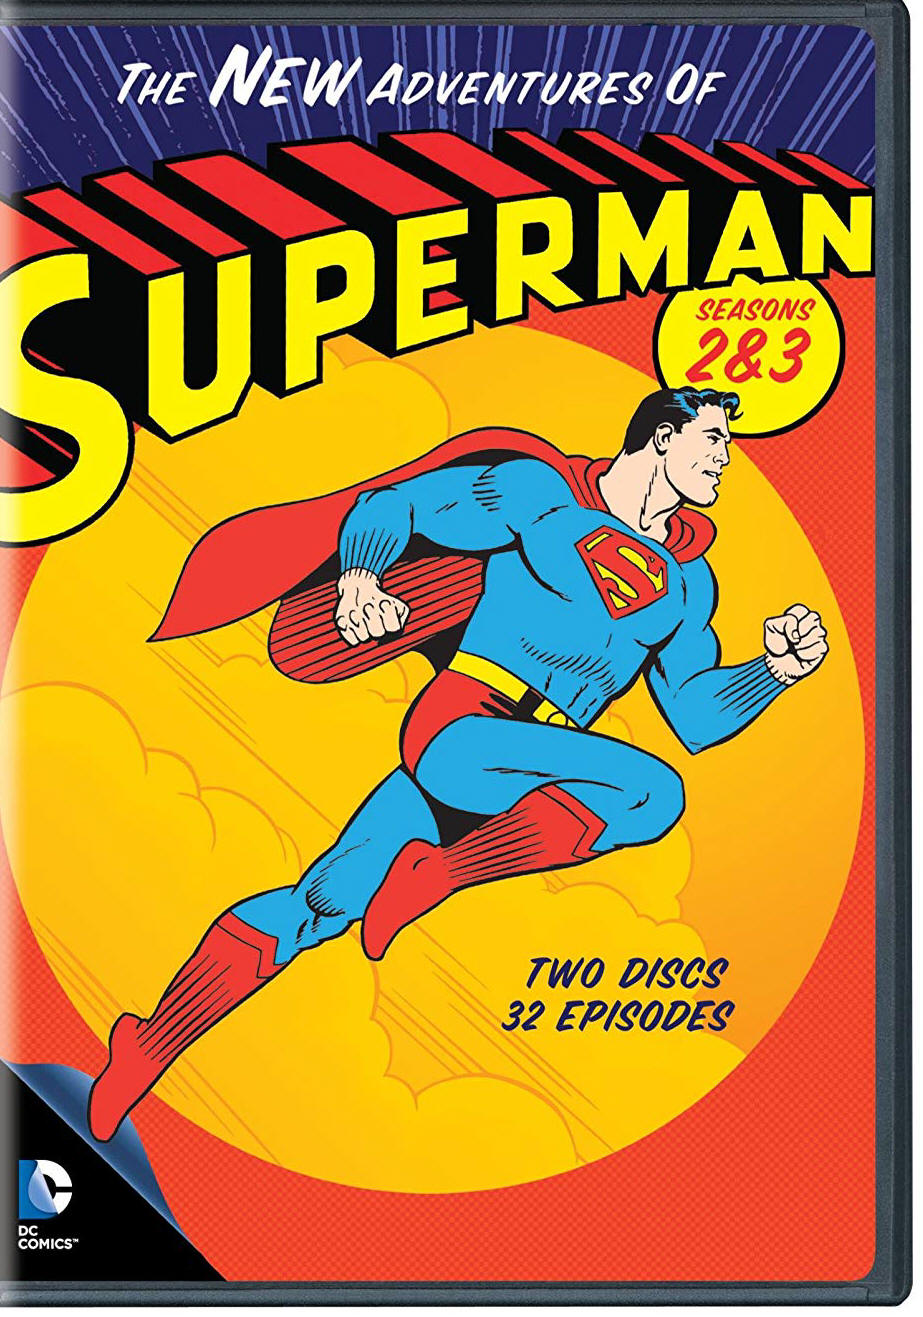 The New Adventures of Superman - 1966 - Season 2 and 3 - DVD